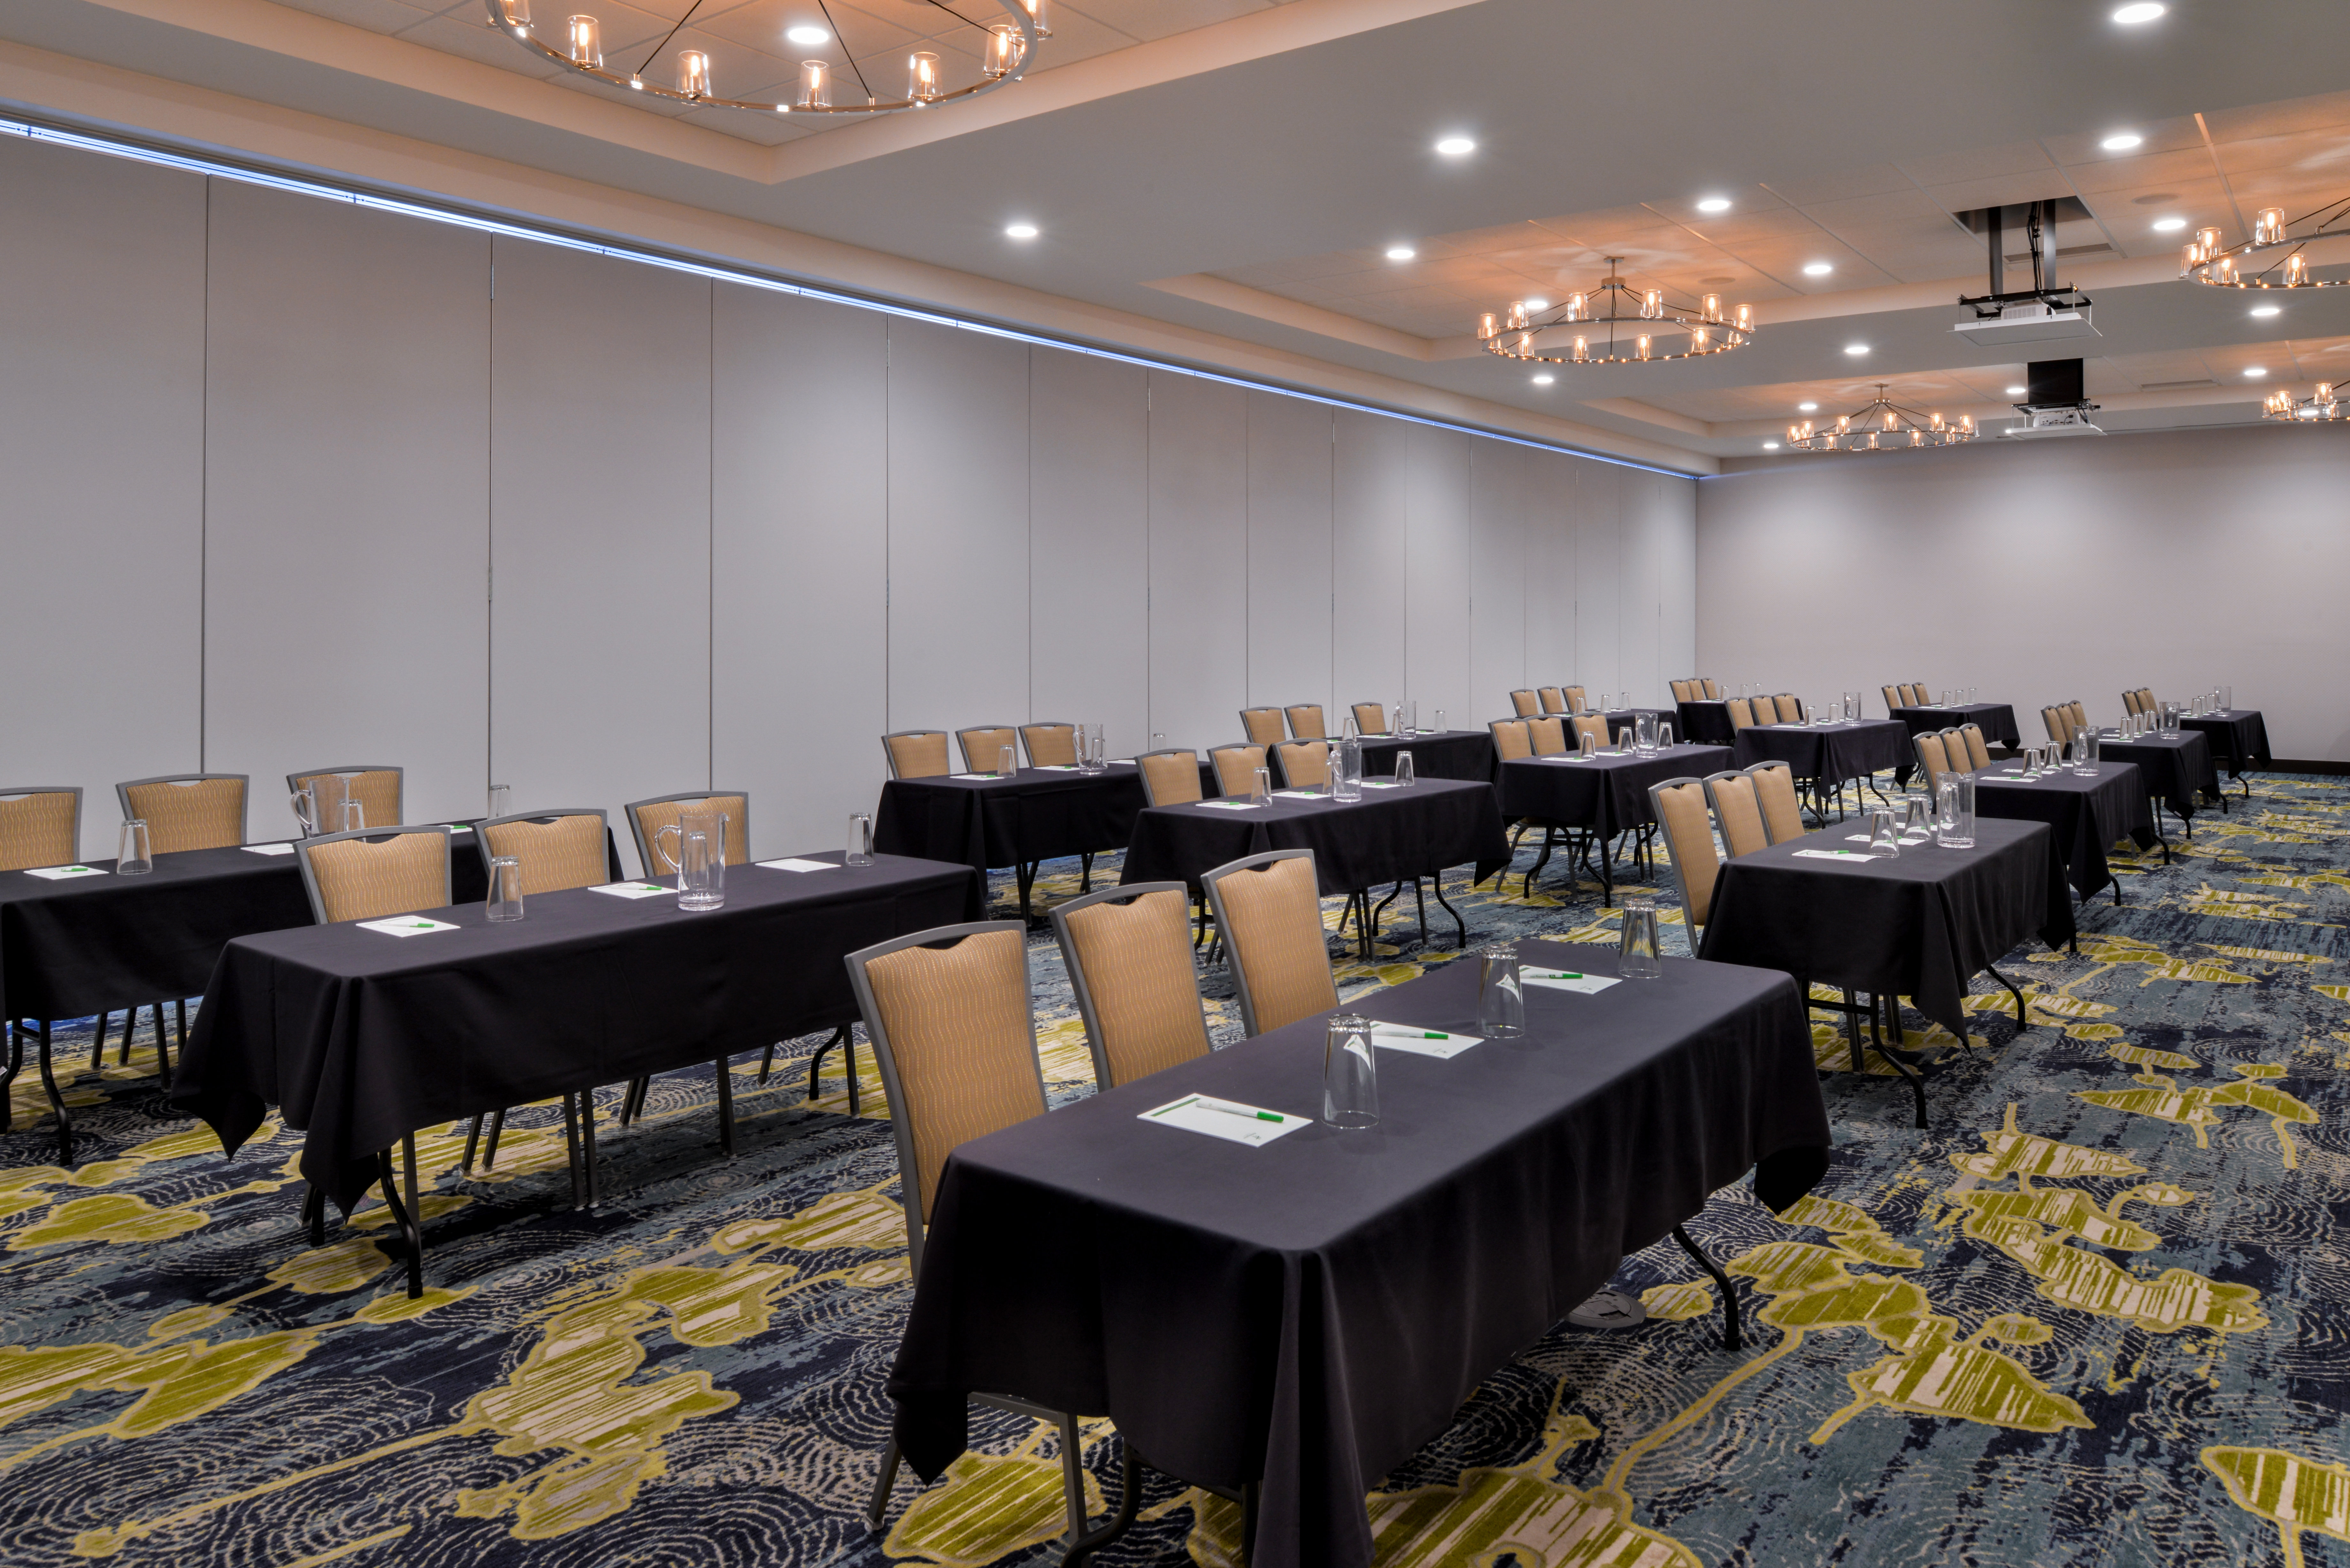 Our meeting space in Livonia is perfect for your next event.